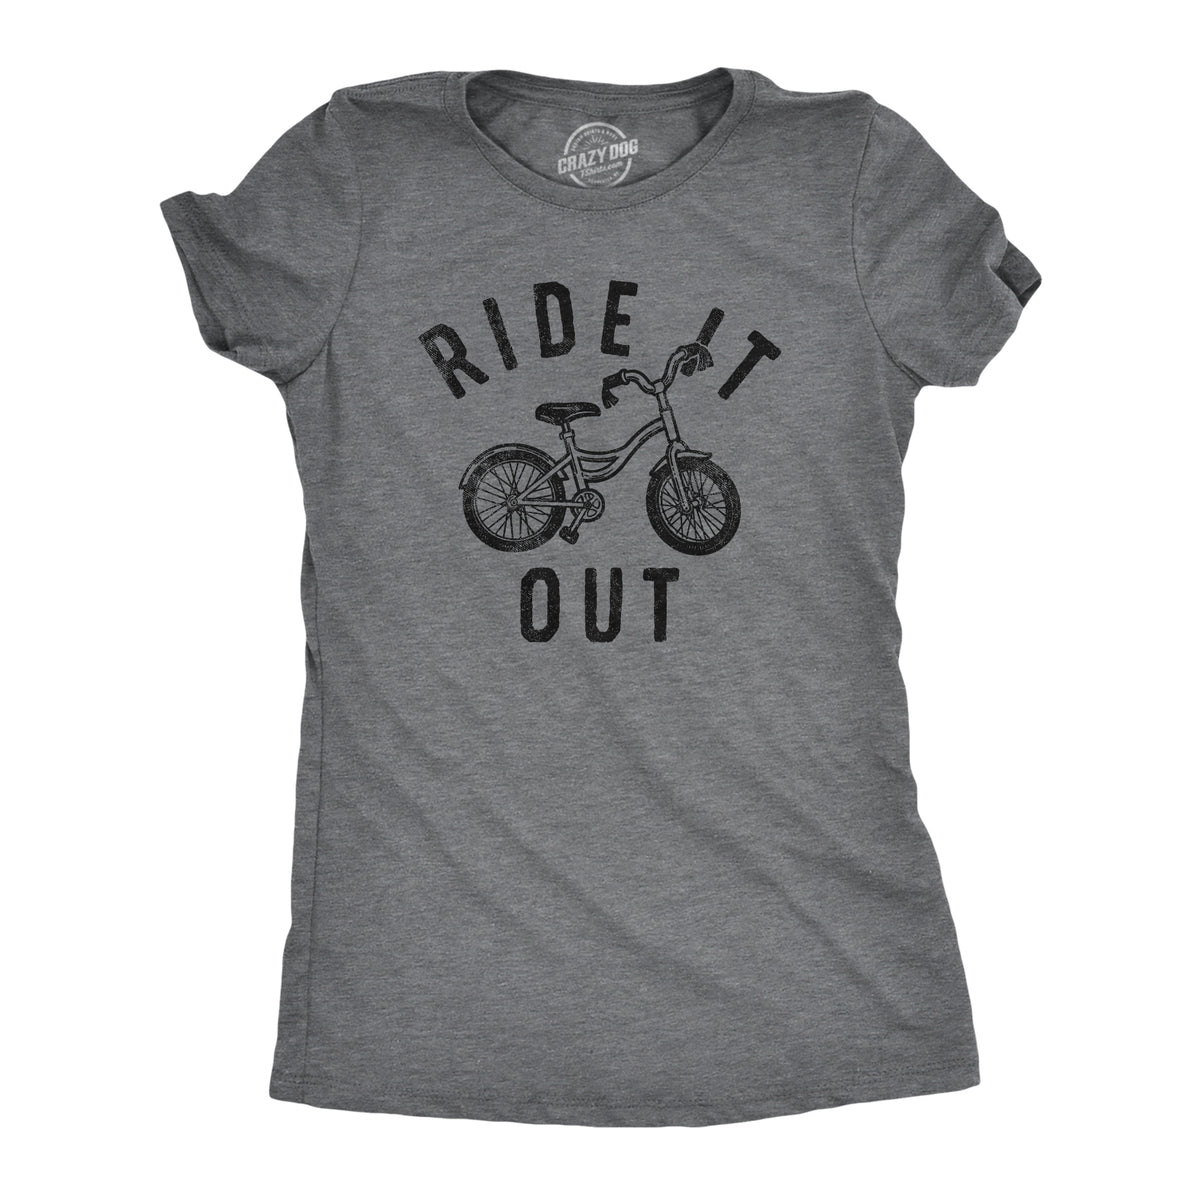 Funny Dark Heather Grey - RIDE Ride It Out Womens T Shirt Nerdy sarcastic Tee